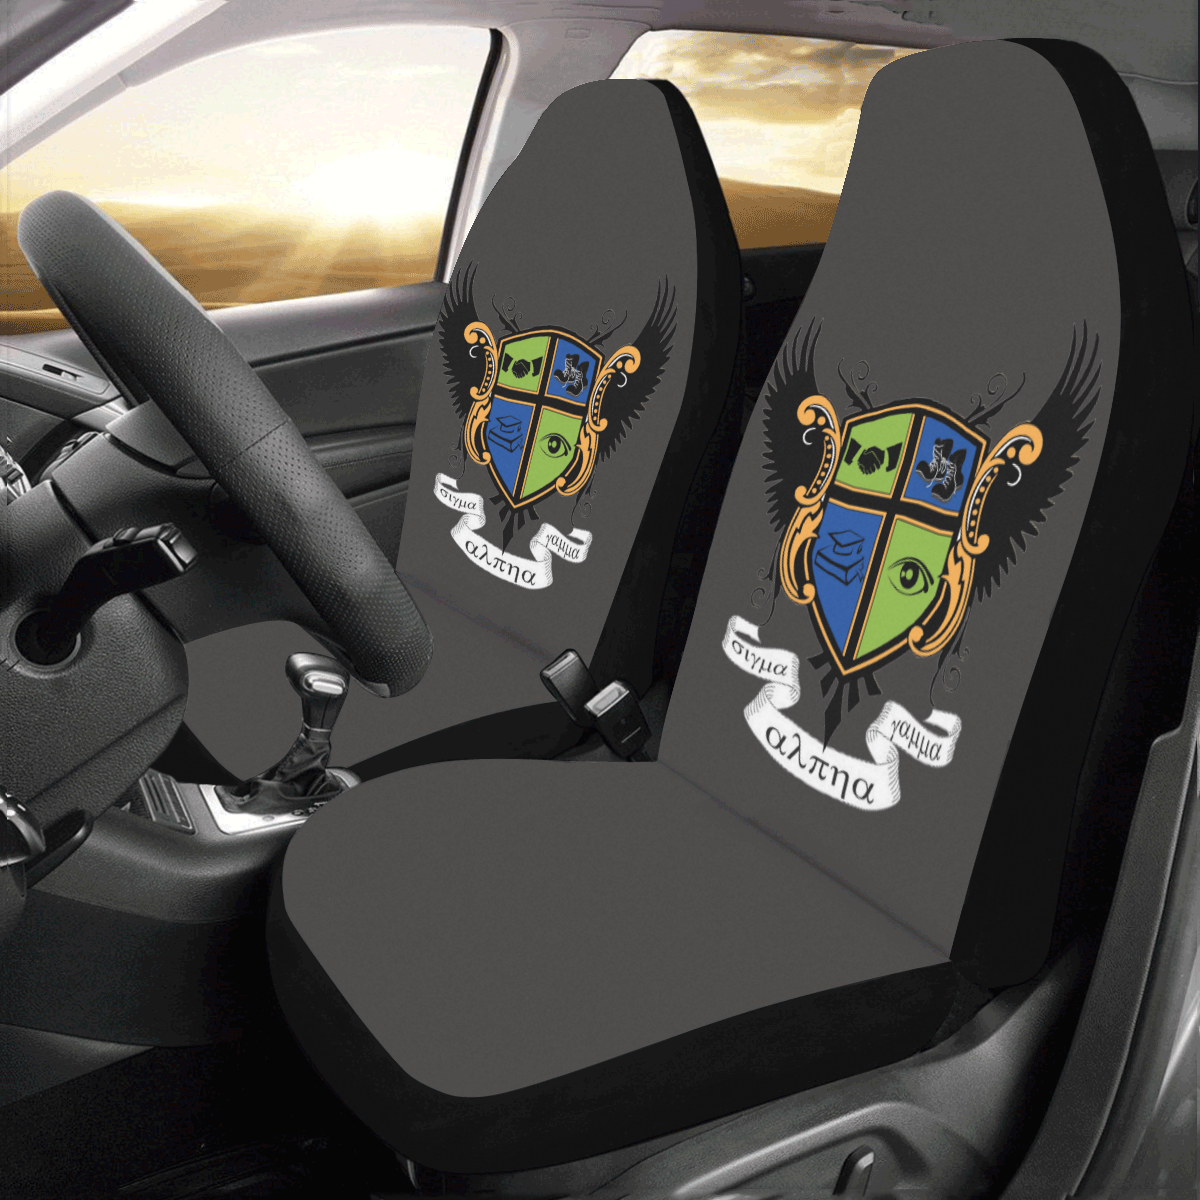 crest Car Seat Covers (Set of 2)